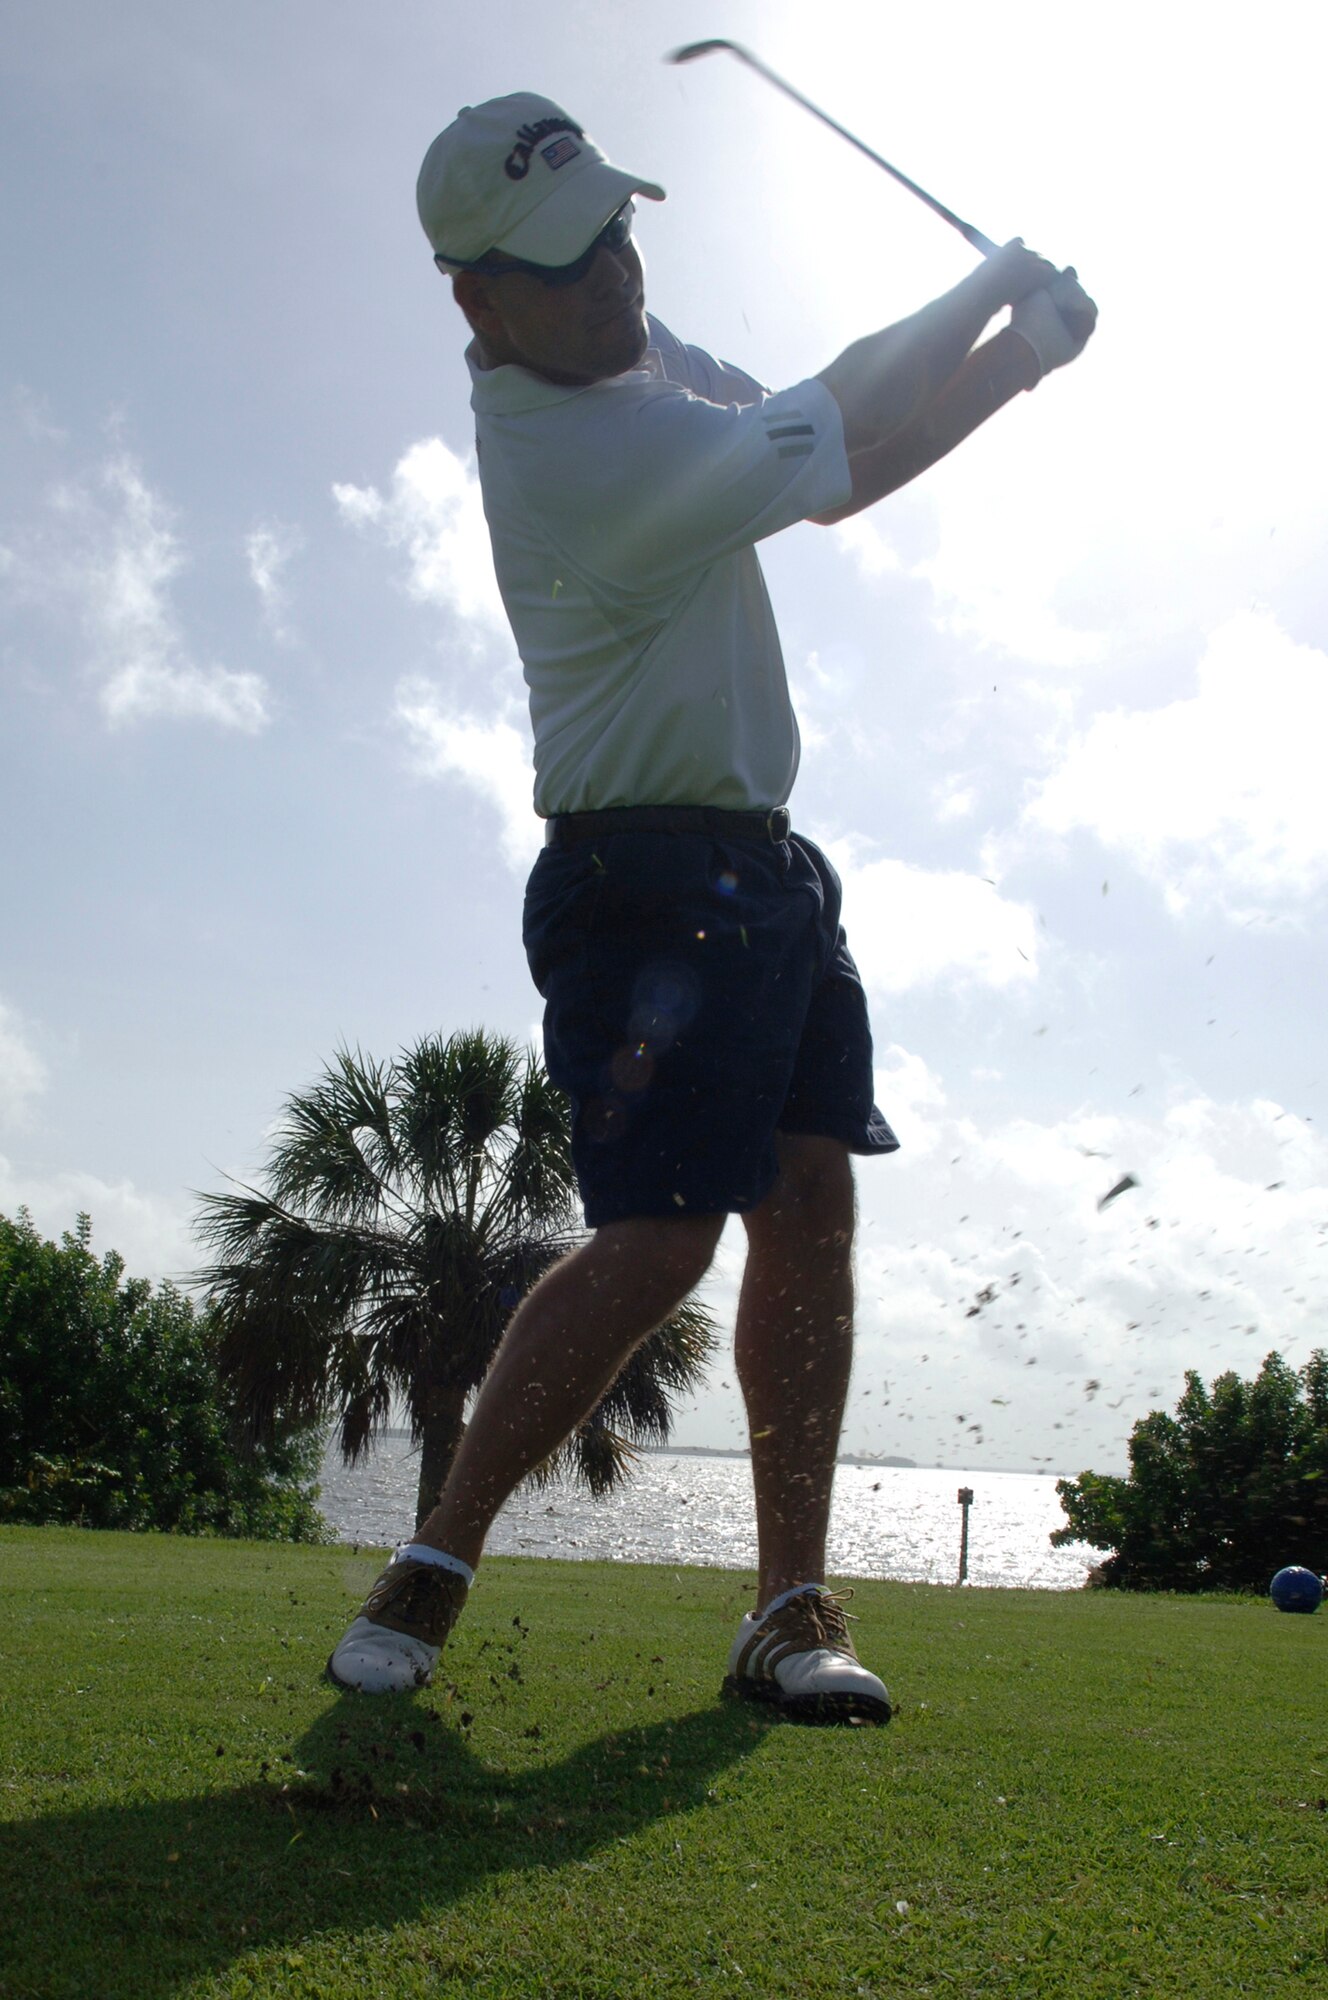 U.S. Air Force A1C John Little practices his gold swing at MacDill AFB September 02, 2008.  A1C Little has won two gold medals for the MacDill golf team.  
  (U.S. Air Force photo by Amn Kate Benoy) (Released)